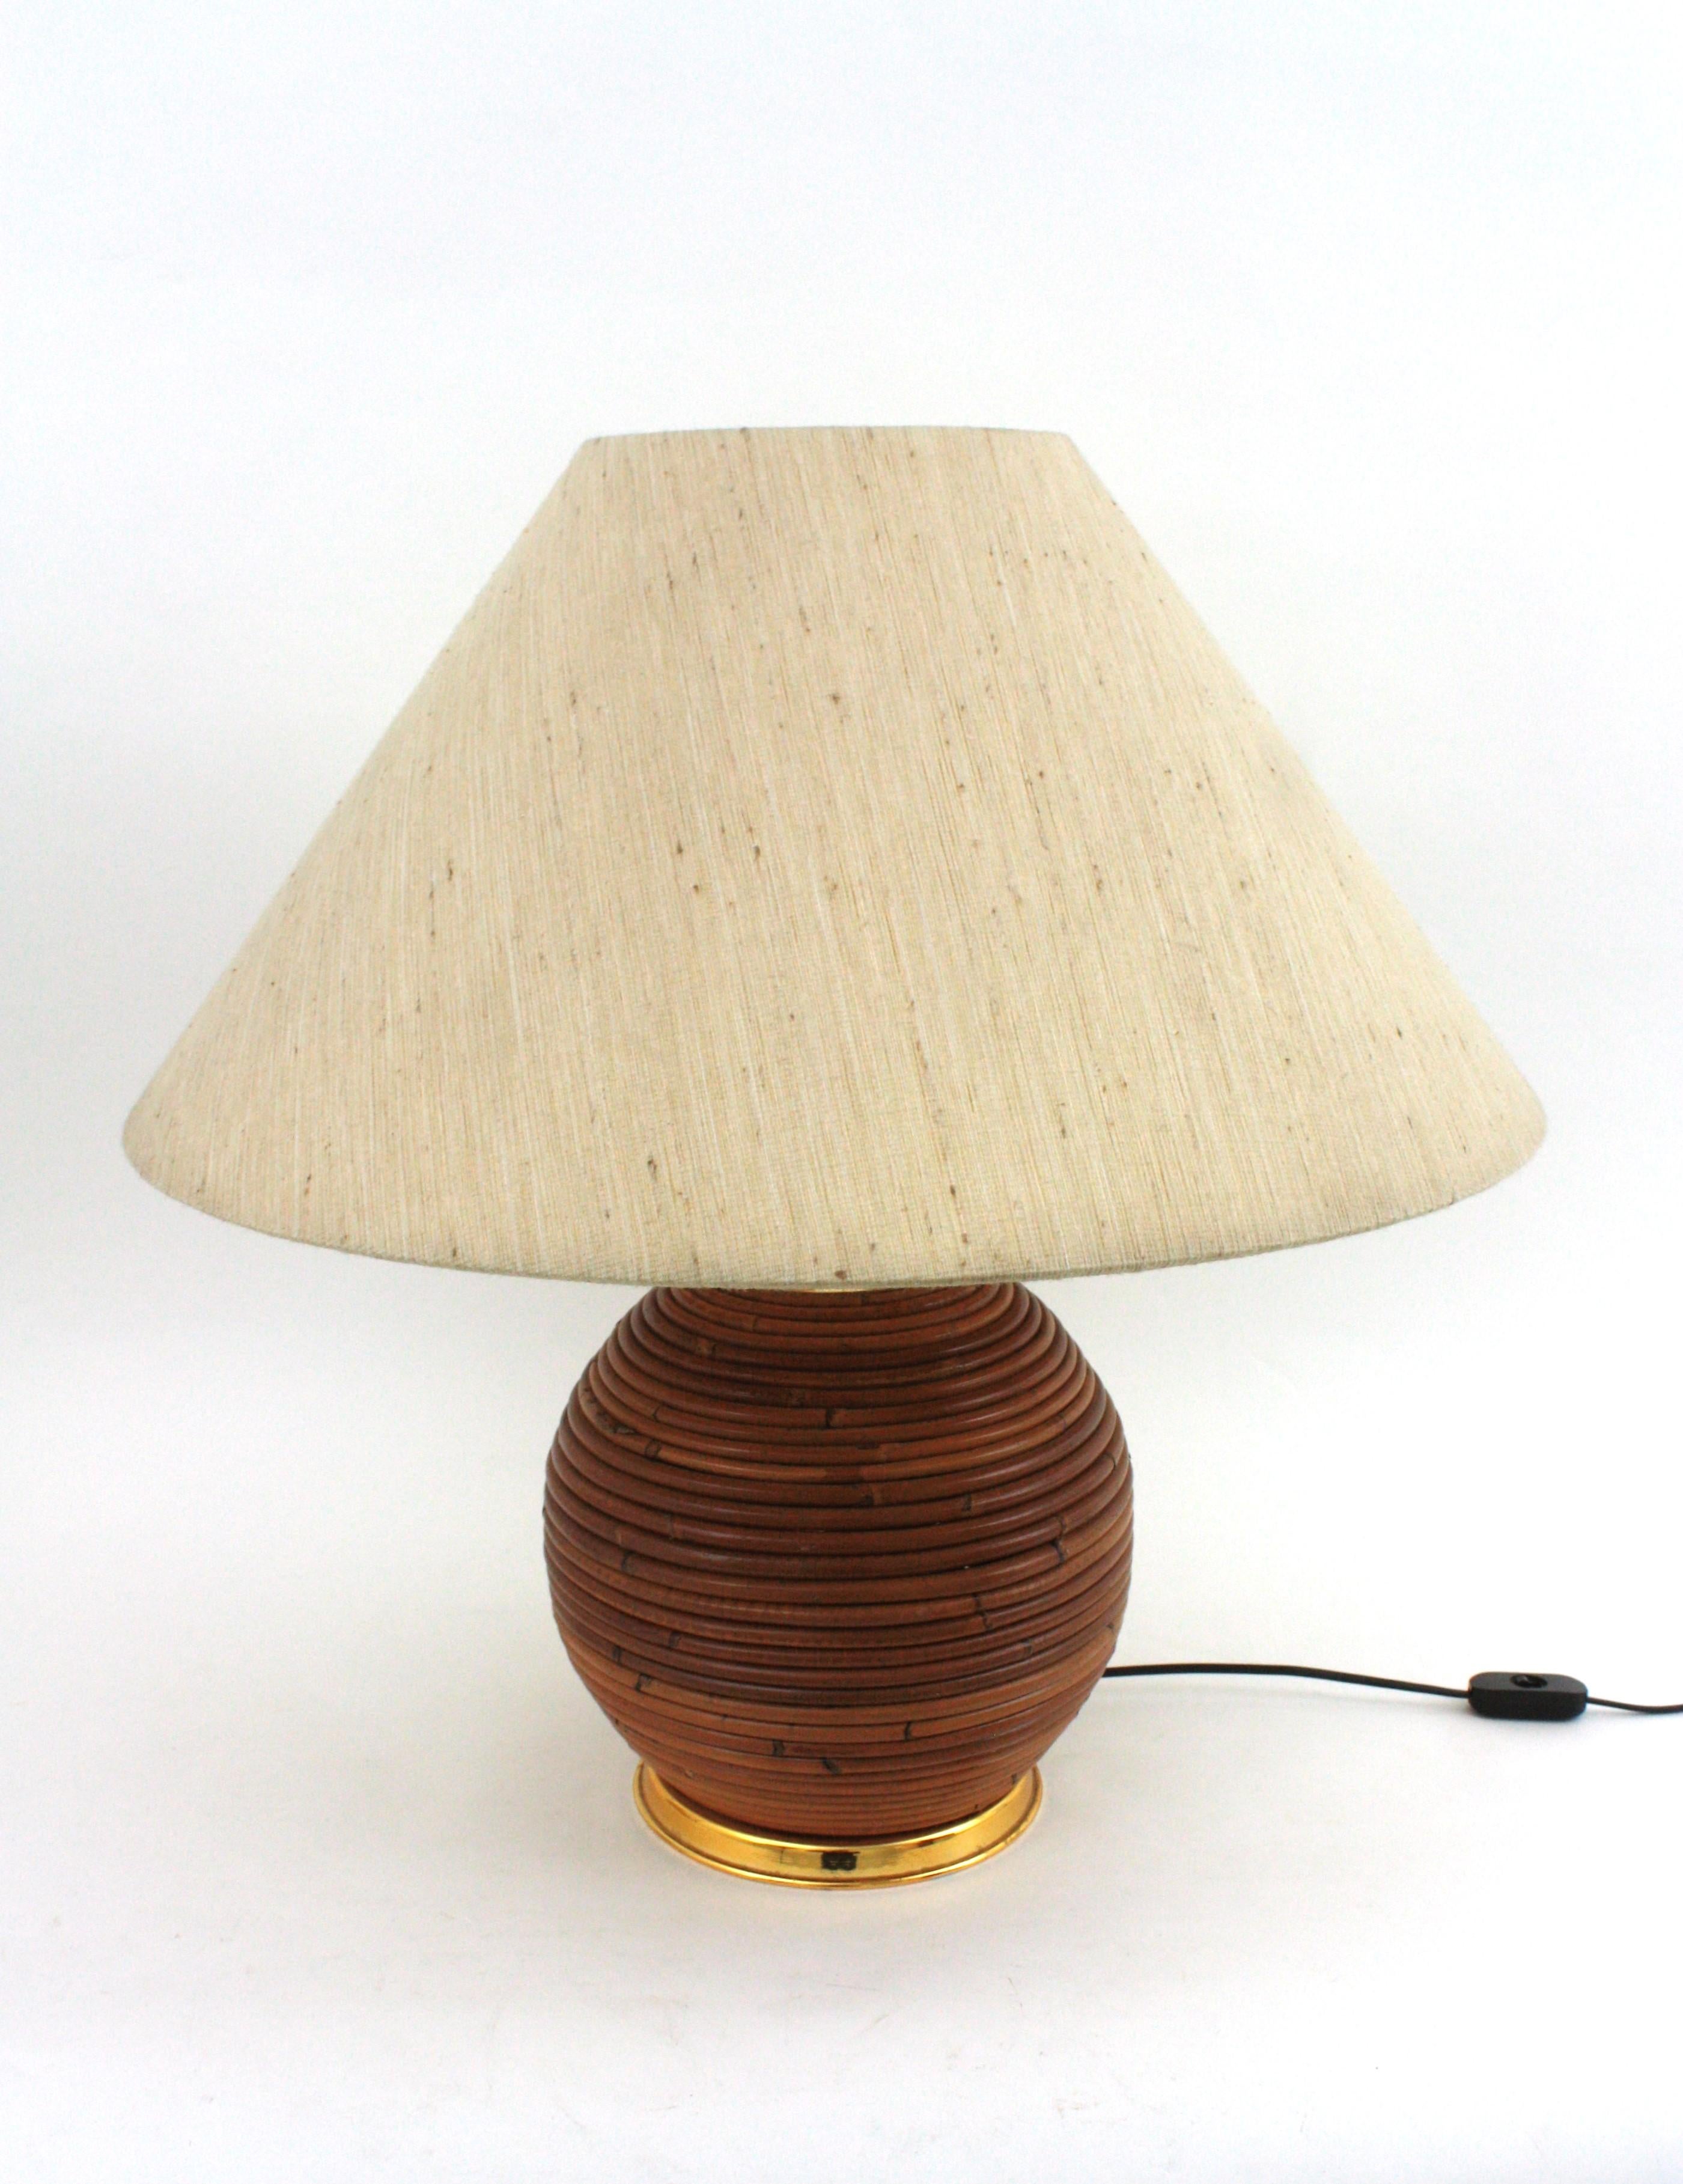 Large Italian Rattan and Brass Ball Table Lamp, 1970s In Good Condition For Sale In Barcelona, ES